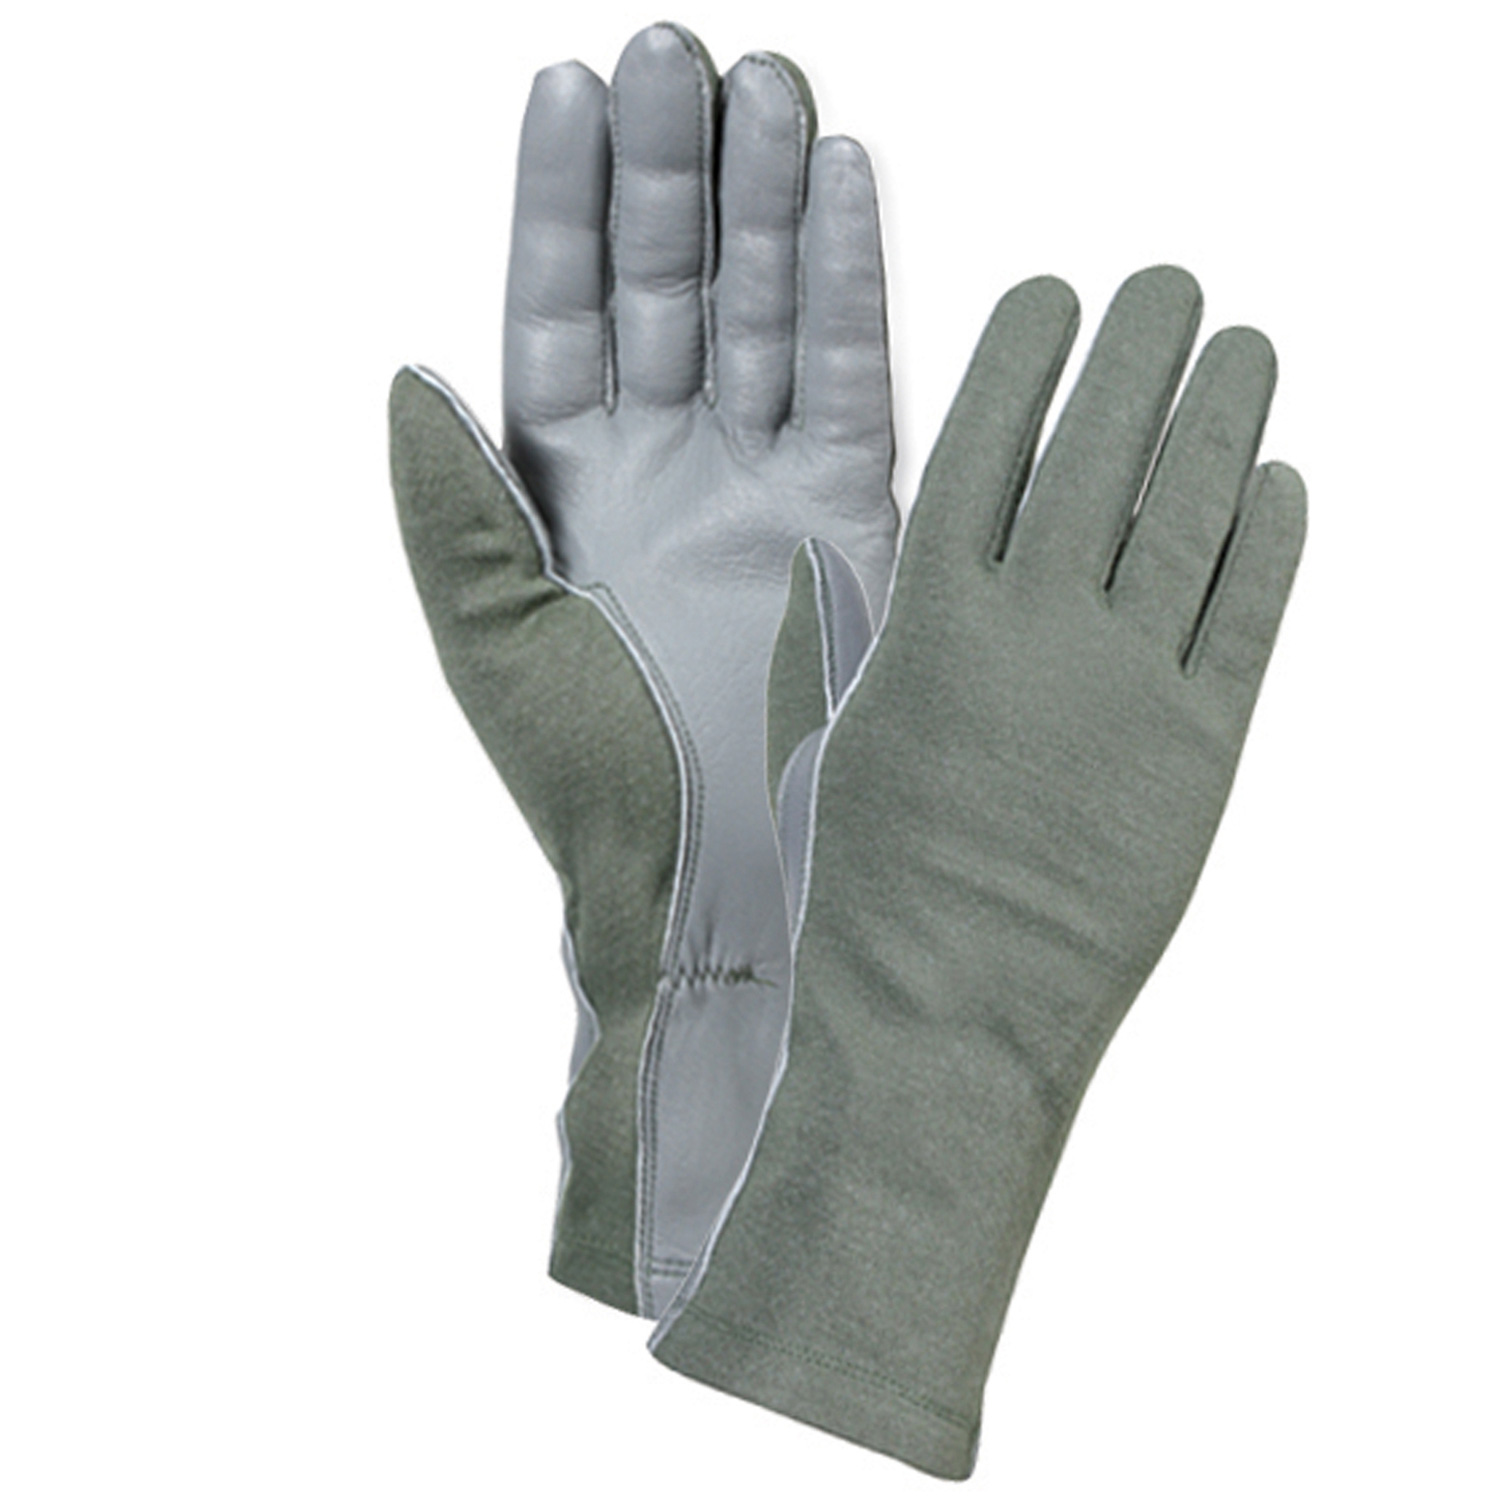 Olive Drab Military Sheepskin Leather Flame /& Heat Resistant Flight Gloves 3457